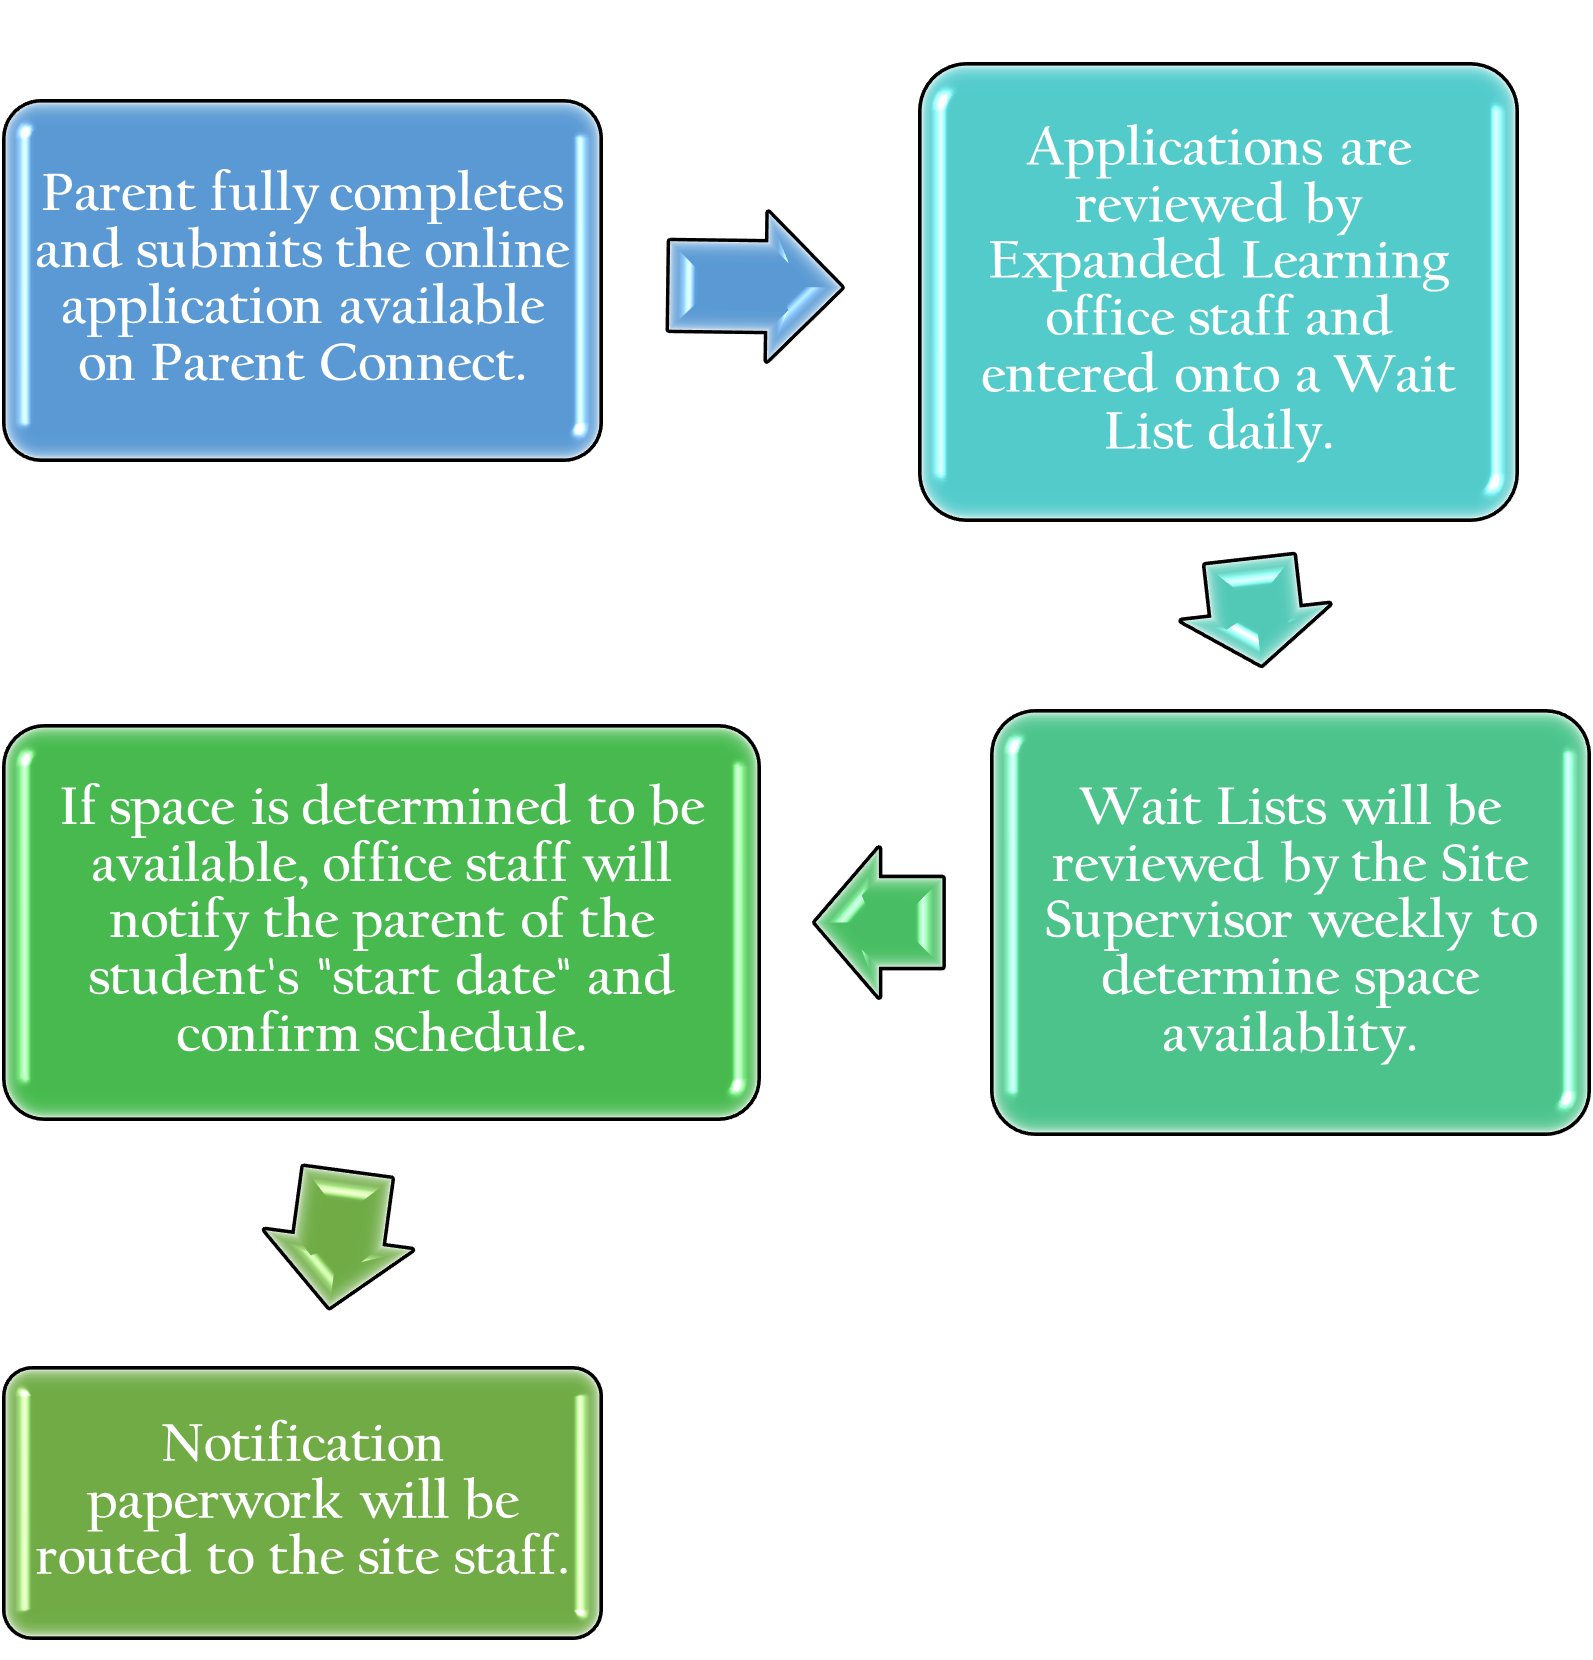 Registration Flow Chart - Parent completes online app via Parent Connect, reviewed by Expanded Learning staff and entered onto waitlist if at capacity, waitlist is reviewed weekly and parents notified if space is available